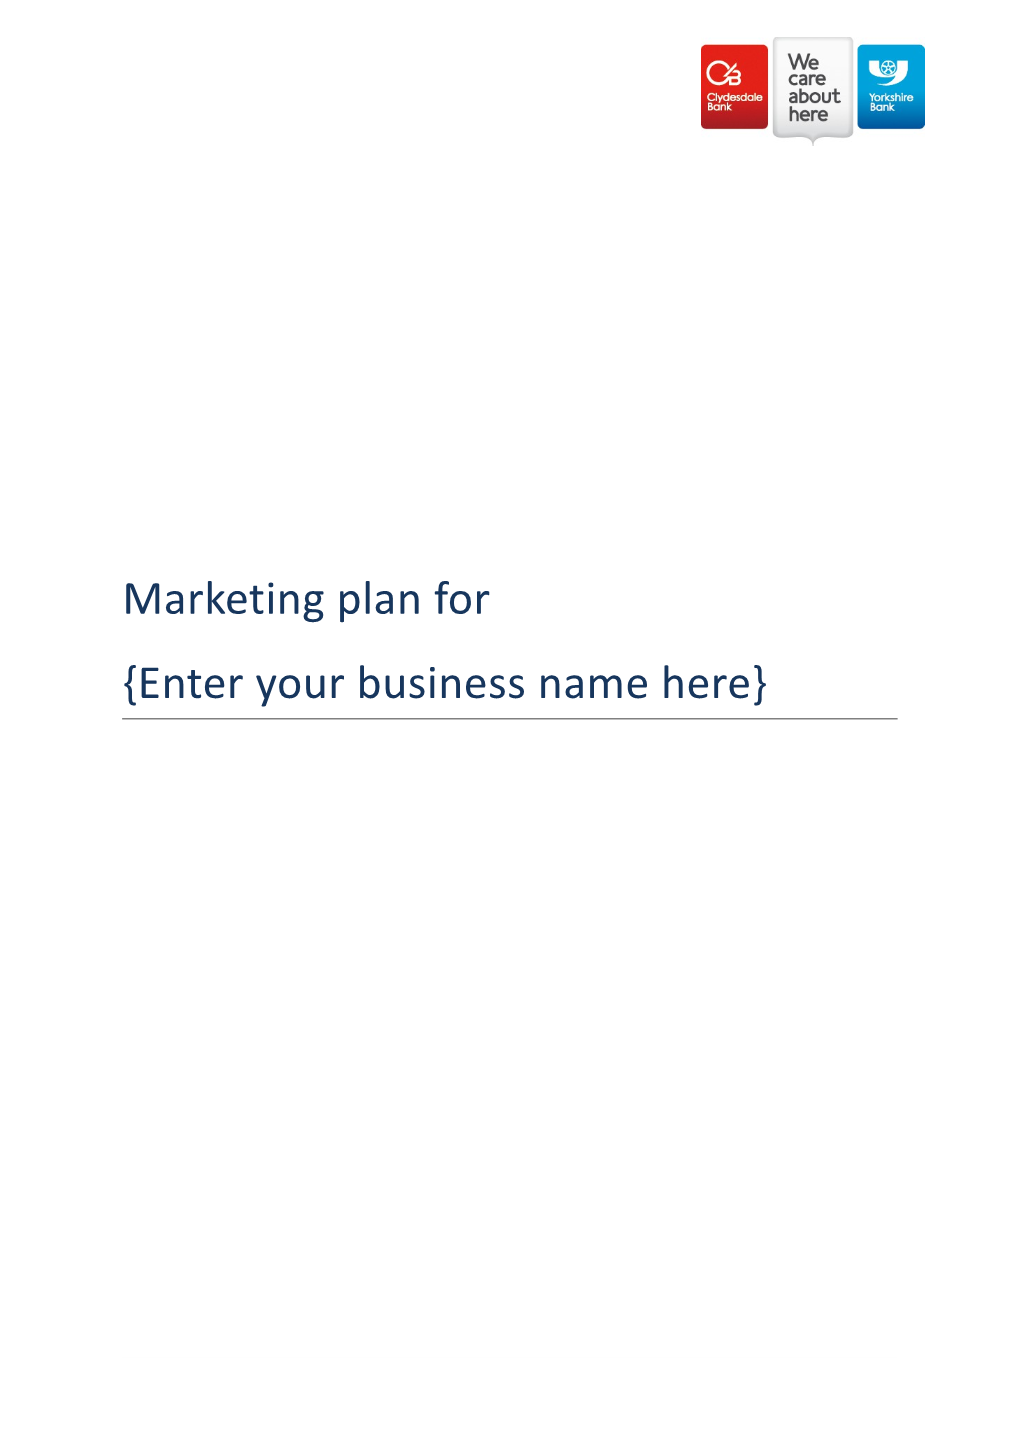 Enter Your Business Name Here